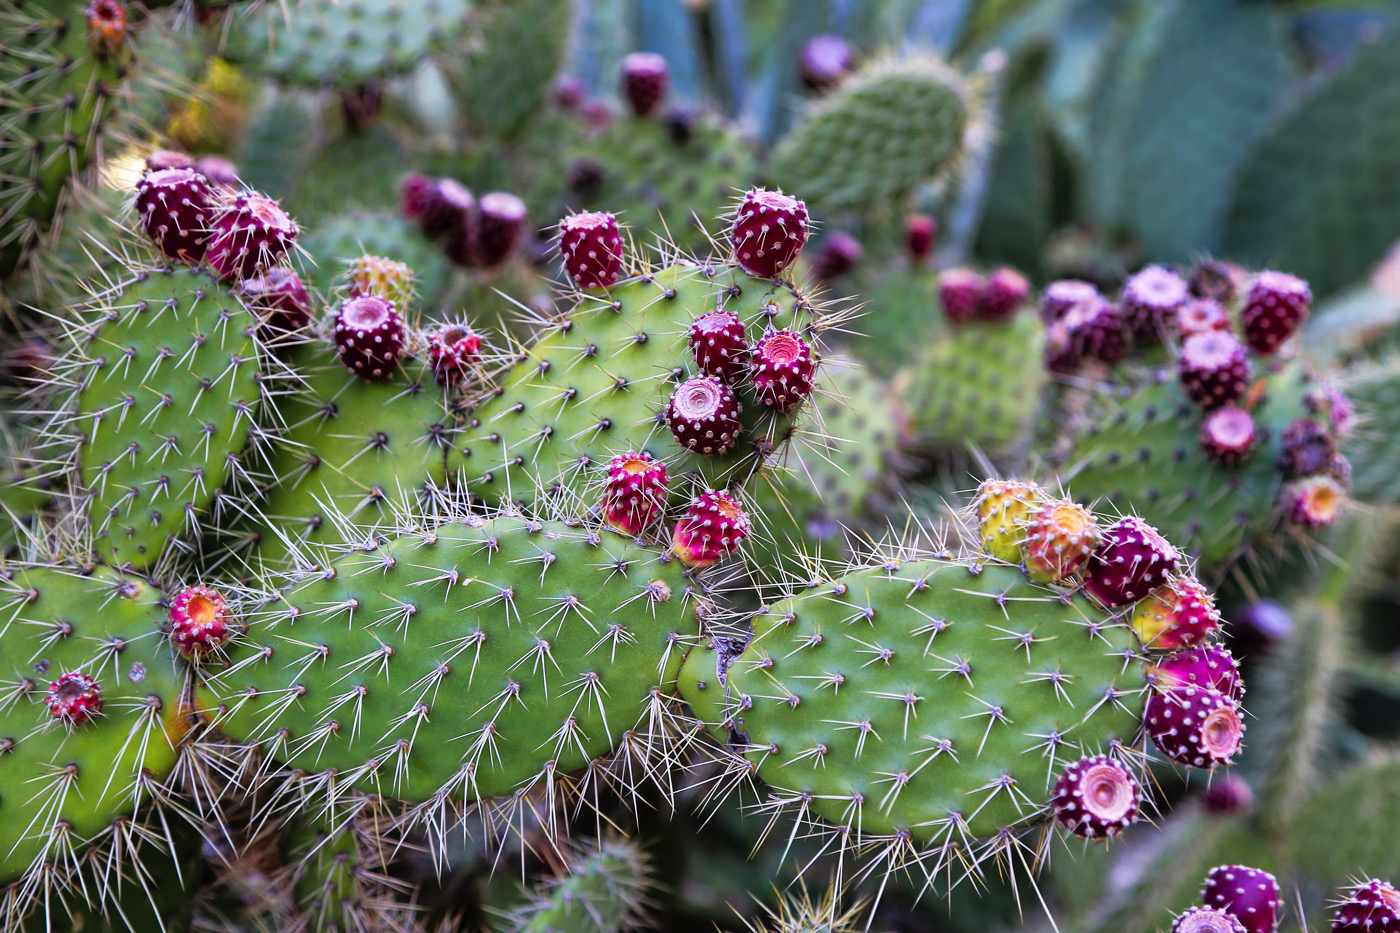 OUCH! HOW TO GET CACTUS NEEDLES OUT OF YOUR SKIN